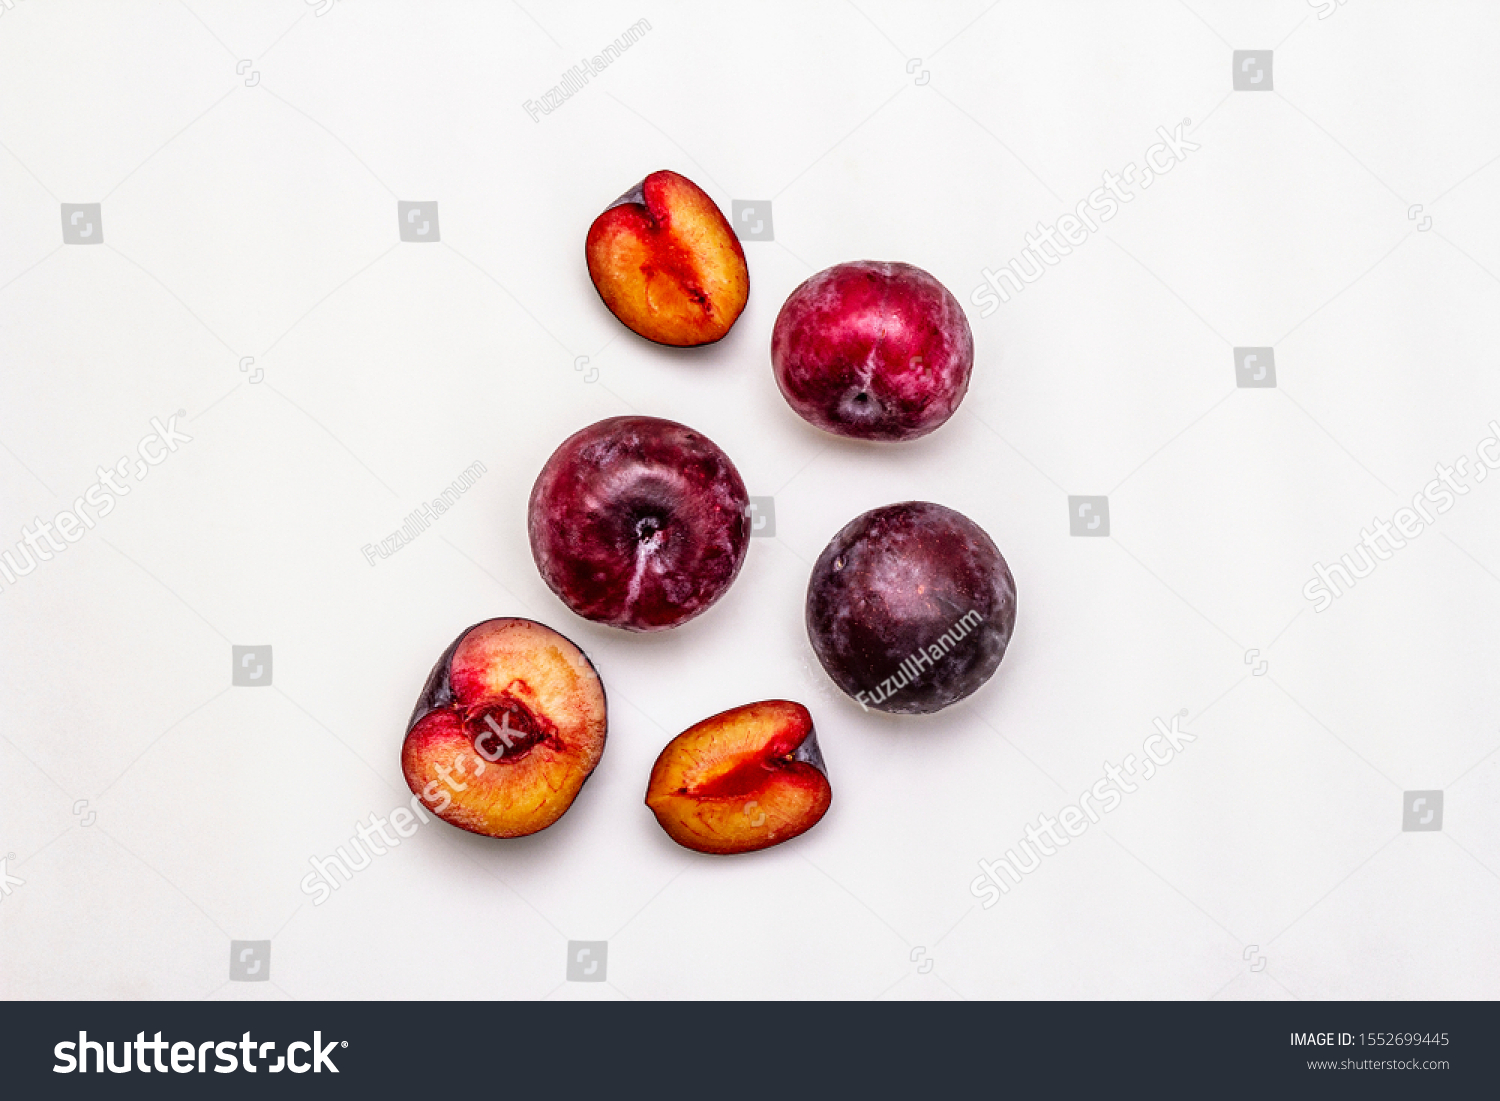 Ripe large purple plums. Fresh whole fruits, half sliced, seeds. Isolated on white background, copy space, top view #1552699445